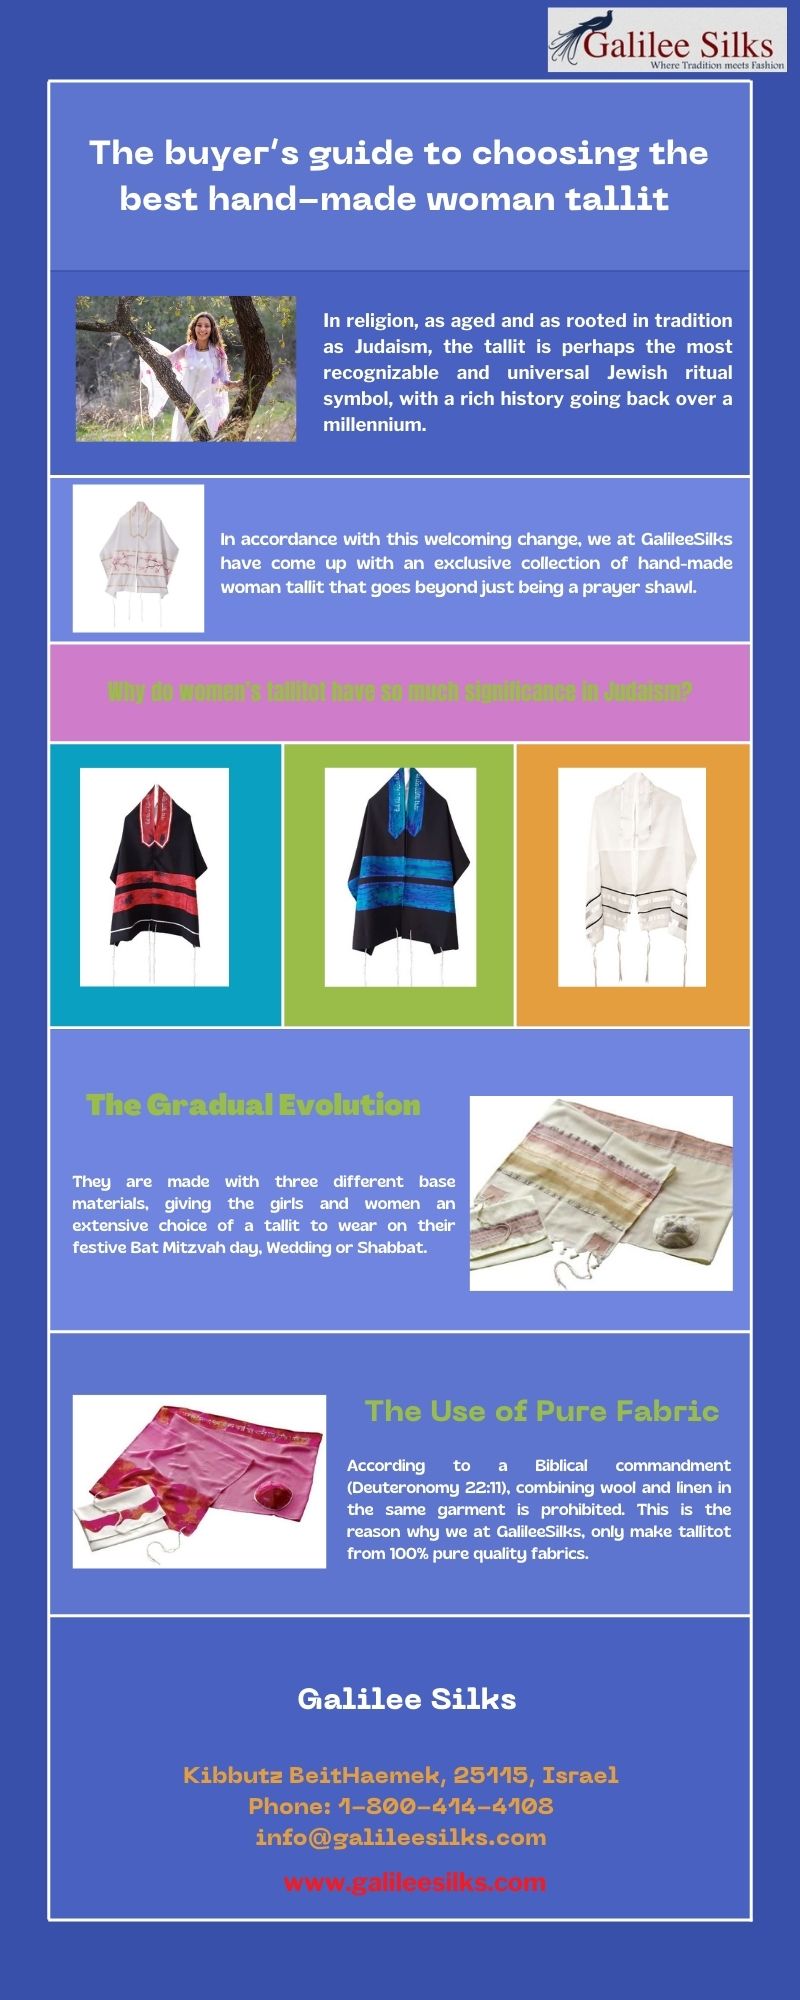 The buyer’s guide to choosing the best hand-made woman tallit  Available in every size, design, pattern, color and fabric, check out the extensive collection of woman tallit from Galilee Silks, made by Israel's leading and inspiring designers. For more visit:https://www.galileesilks.com/collections/womens-tallit-1
 by amramrafi